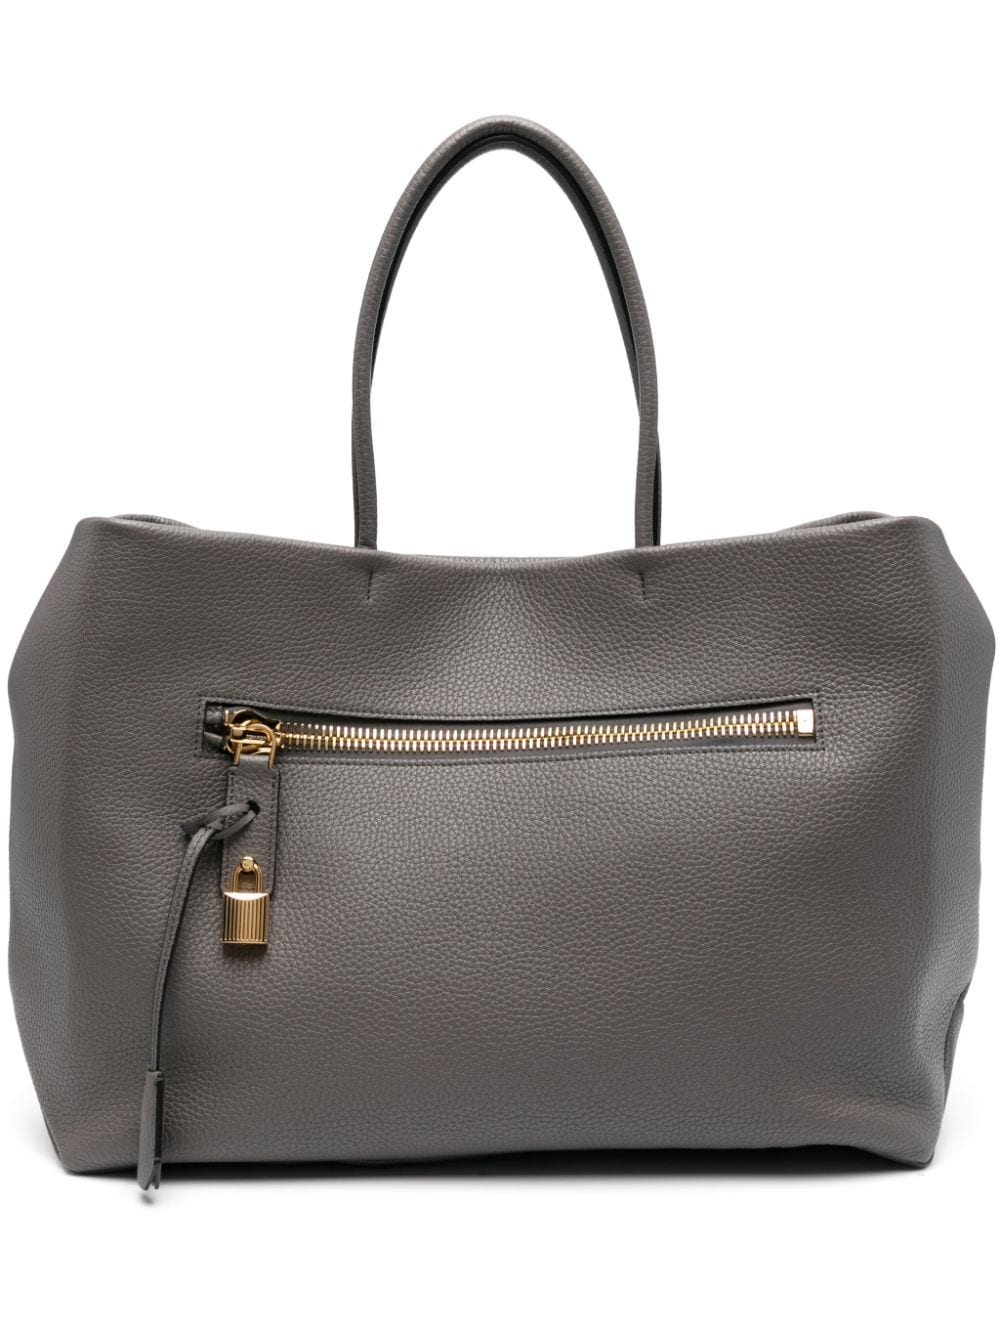 TOM FORD LARGE ALIX LEATHER TOTE BAG